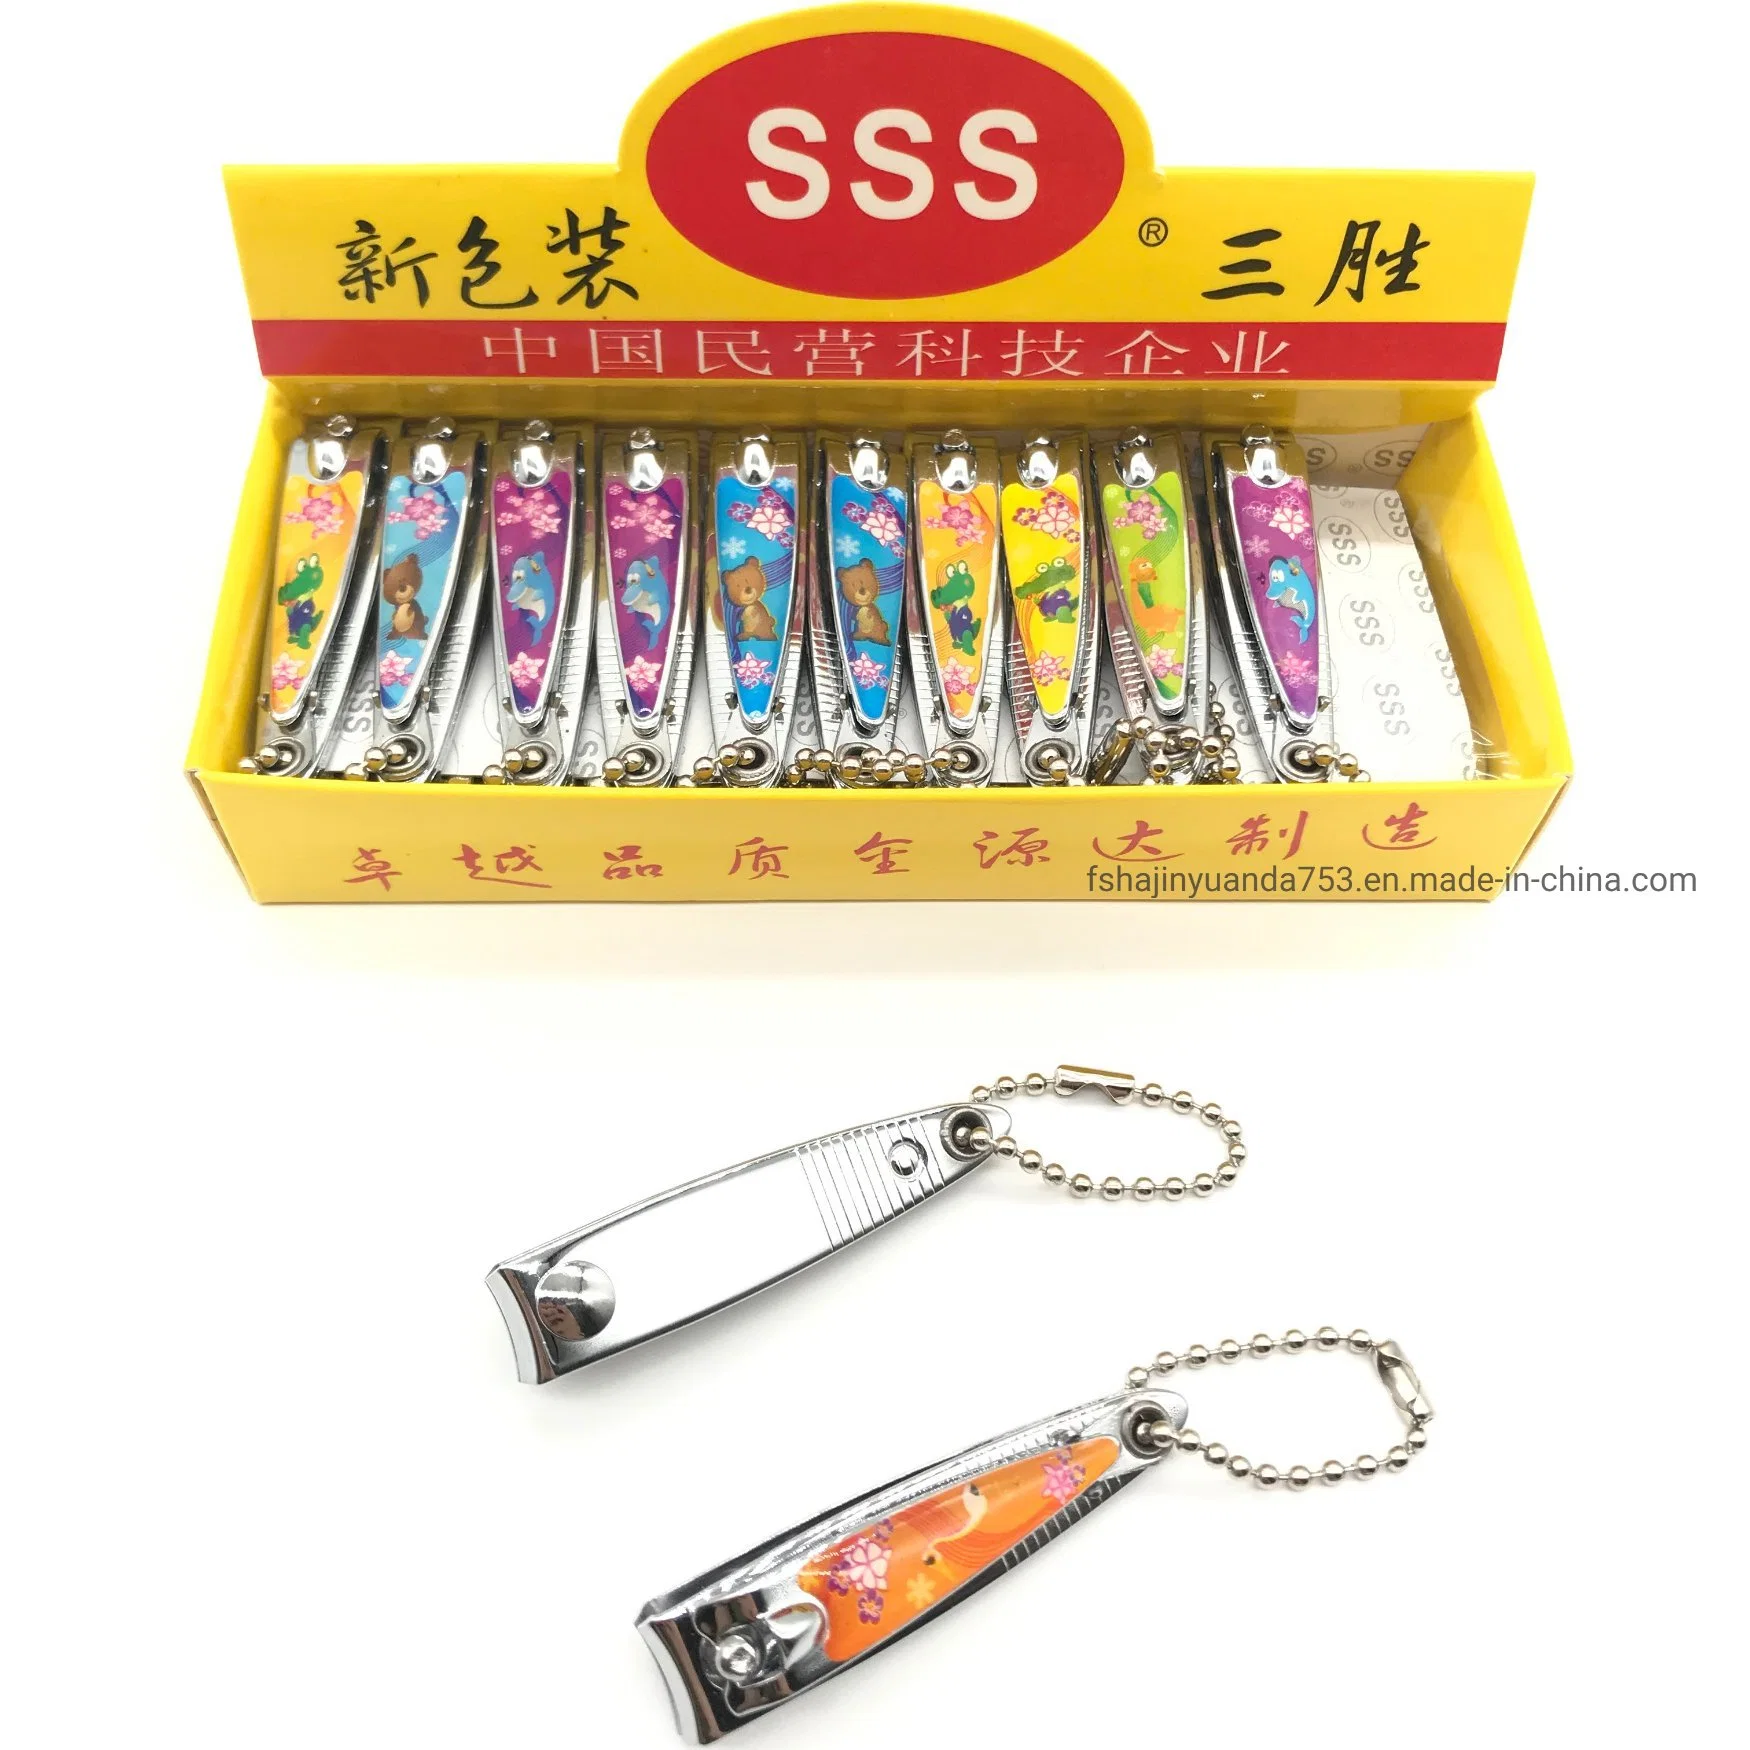 SSS 202 Baby Nail Clippers with File Nail Clippers with Chain Nail Clippers